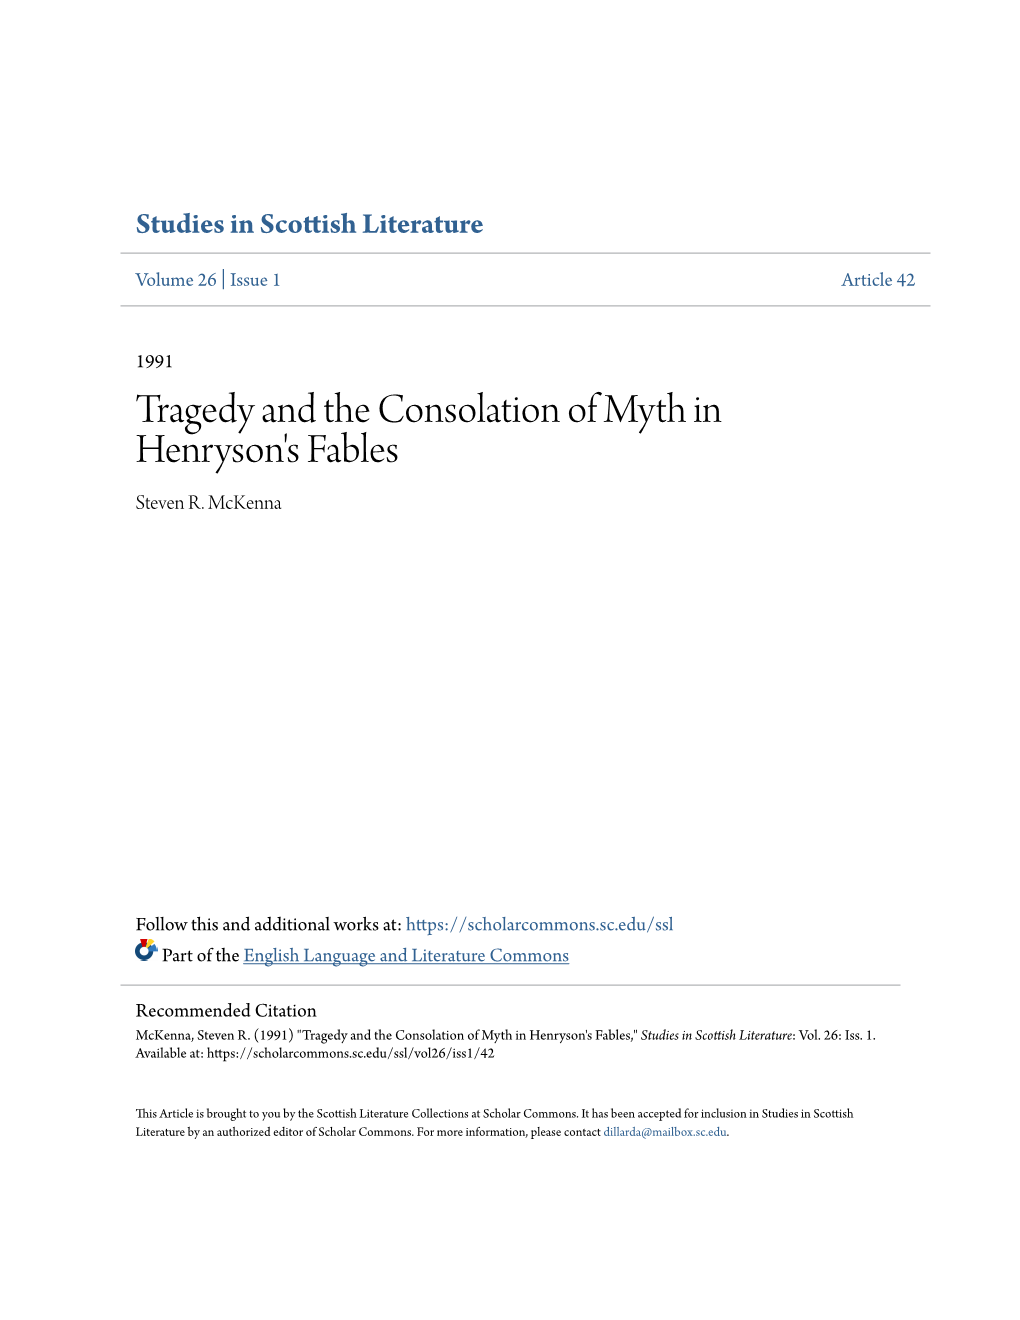 Tragedy and the Consolation of Myth in Henryson's Fables Steven R